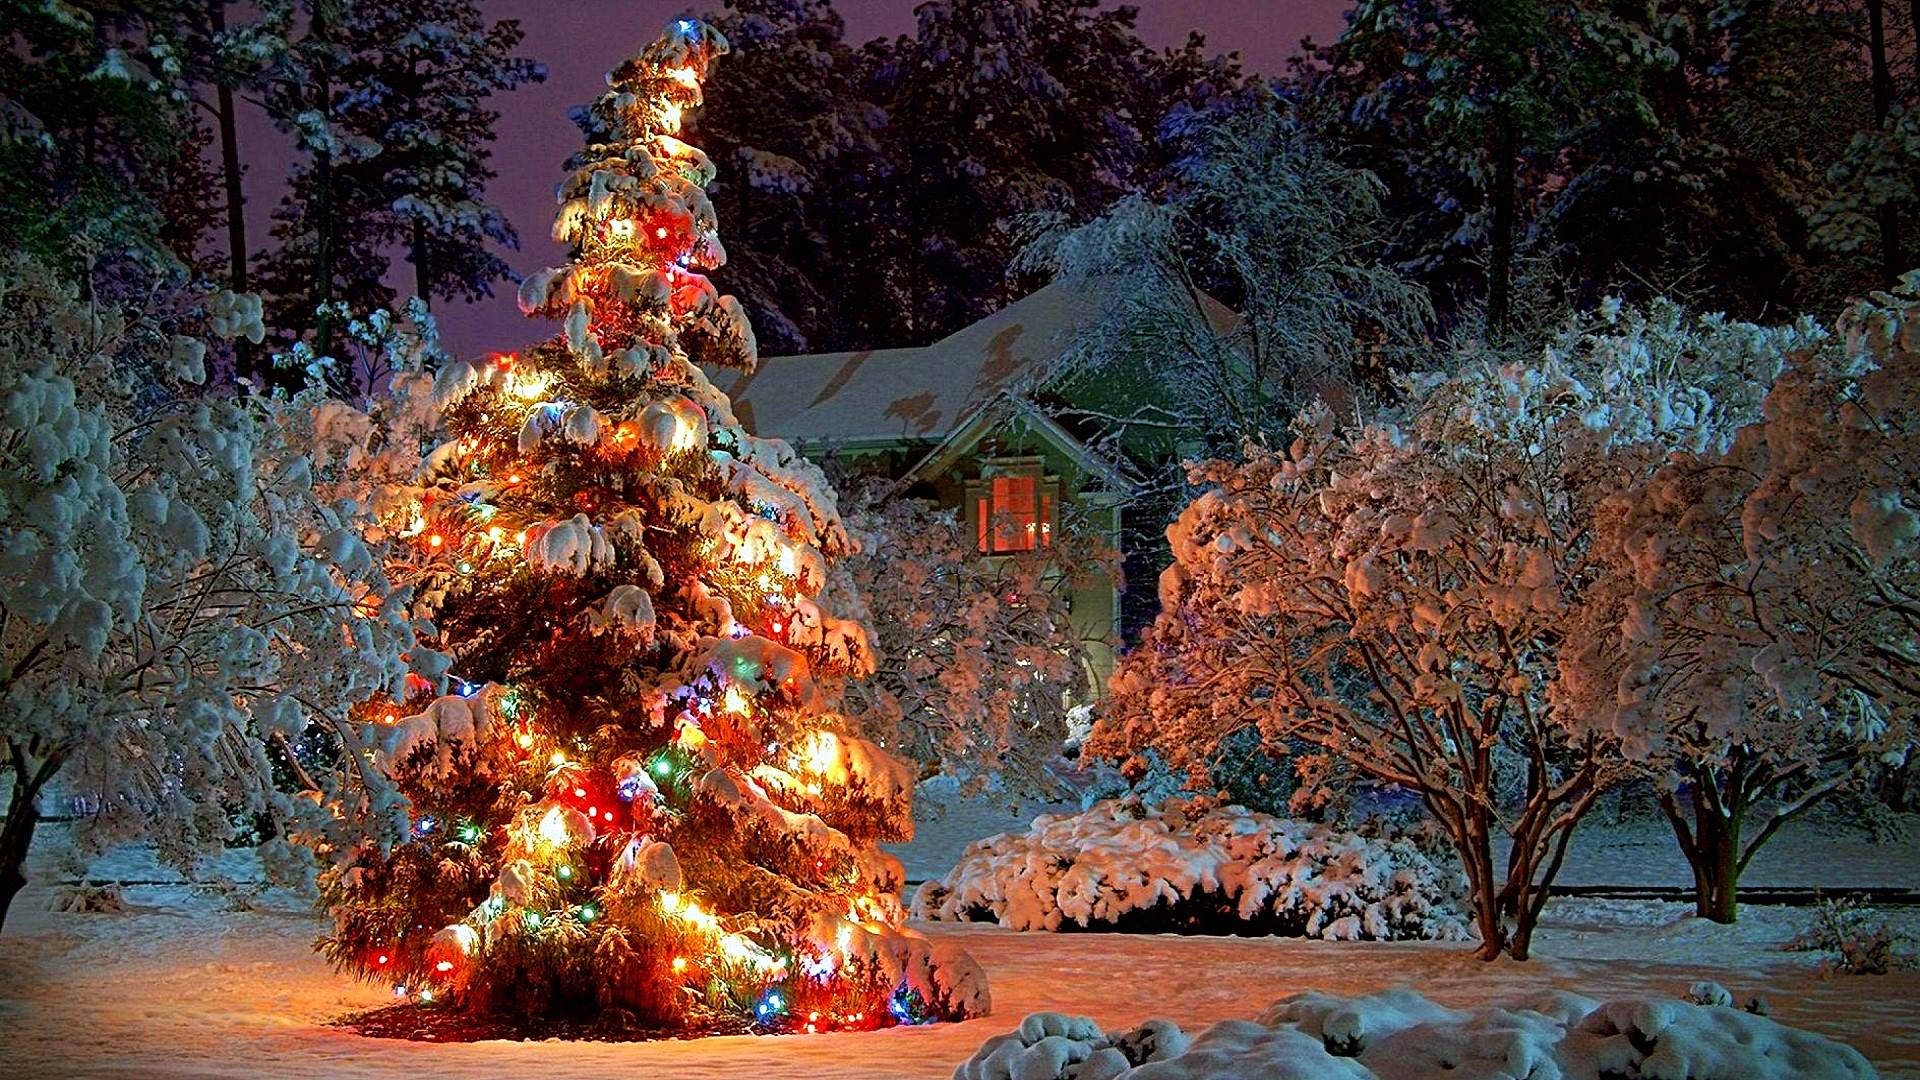 A magical Christmas Tree lit up in a snowy garden. Wallpaper